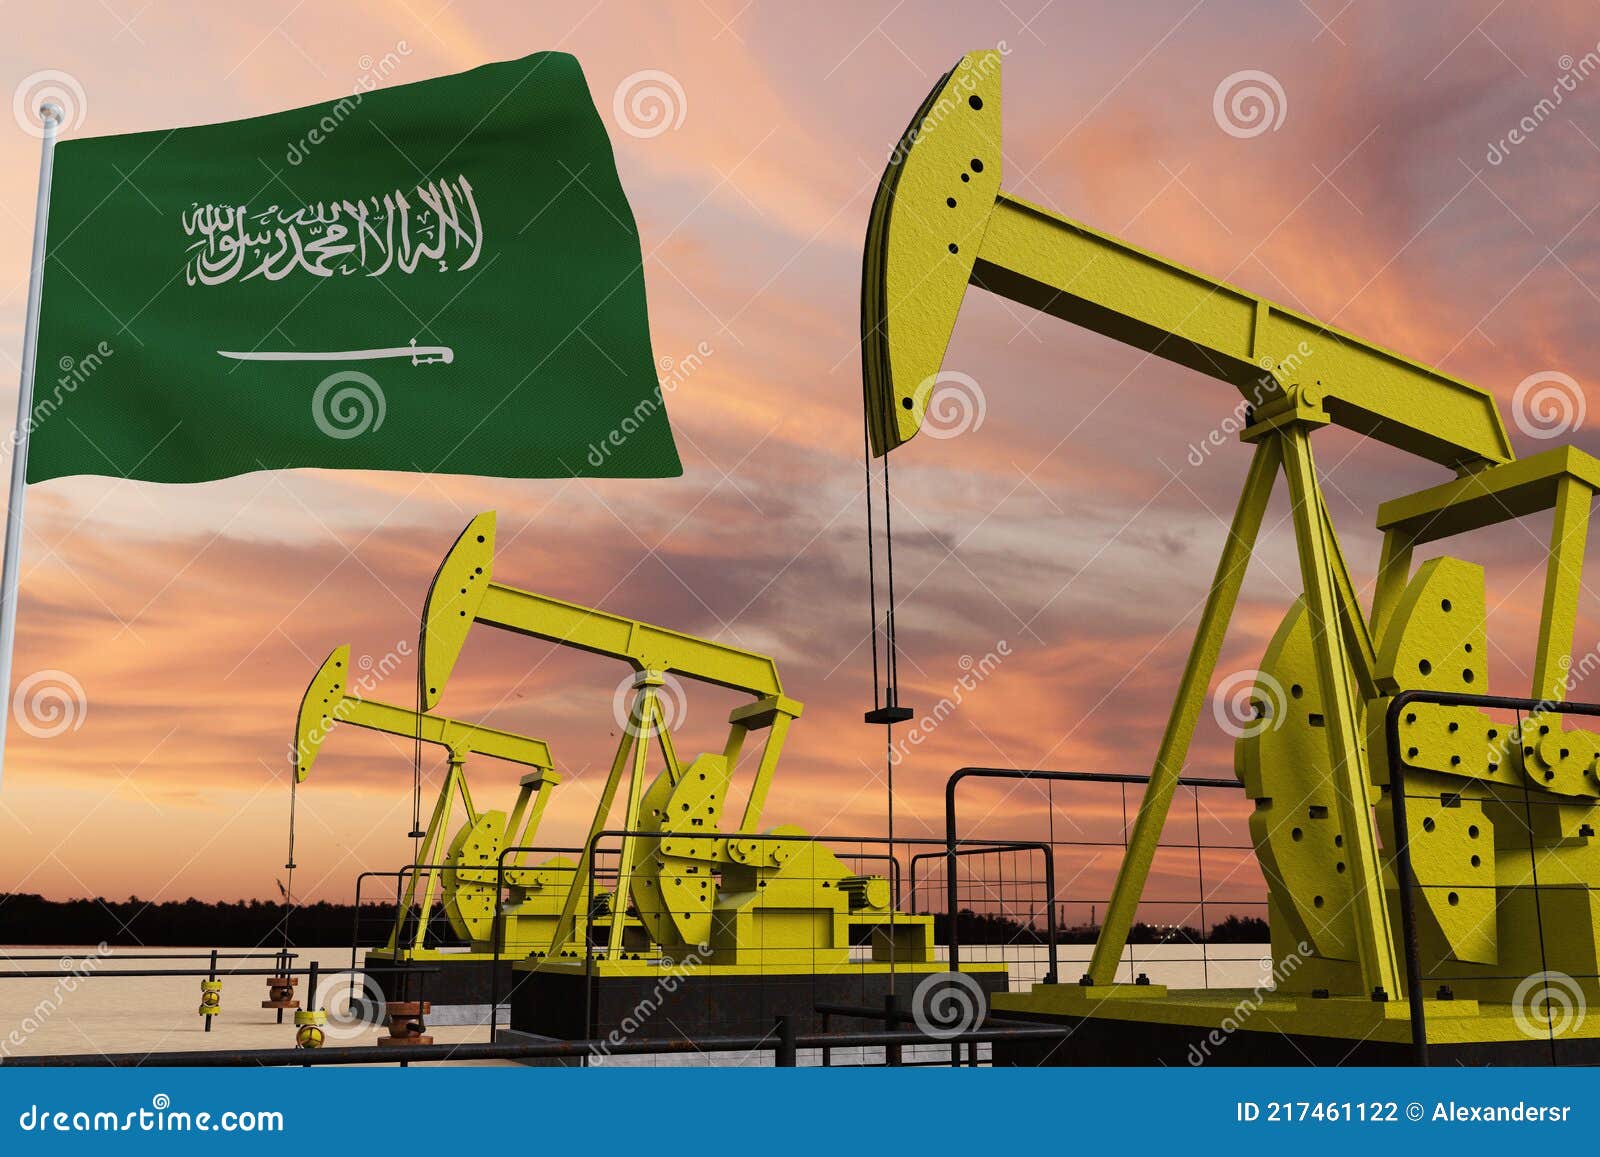 nice pumpjack oil extraction and cloudy sky in sunset with the saudi arabia flag